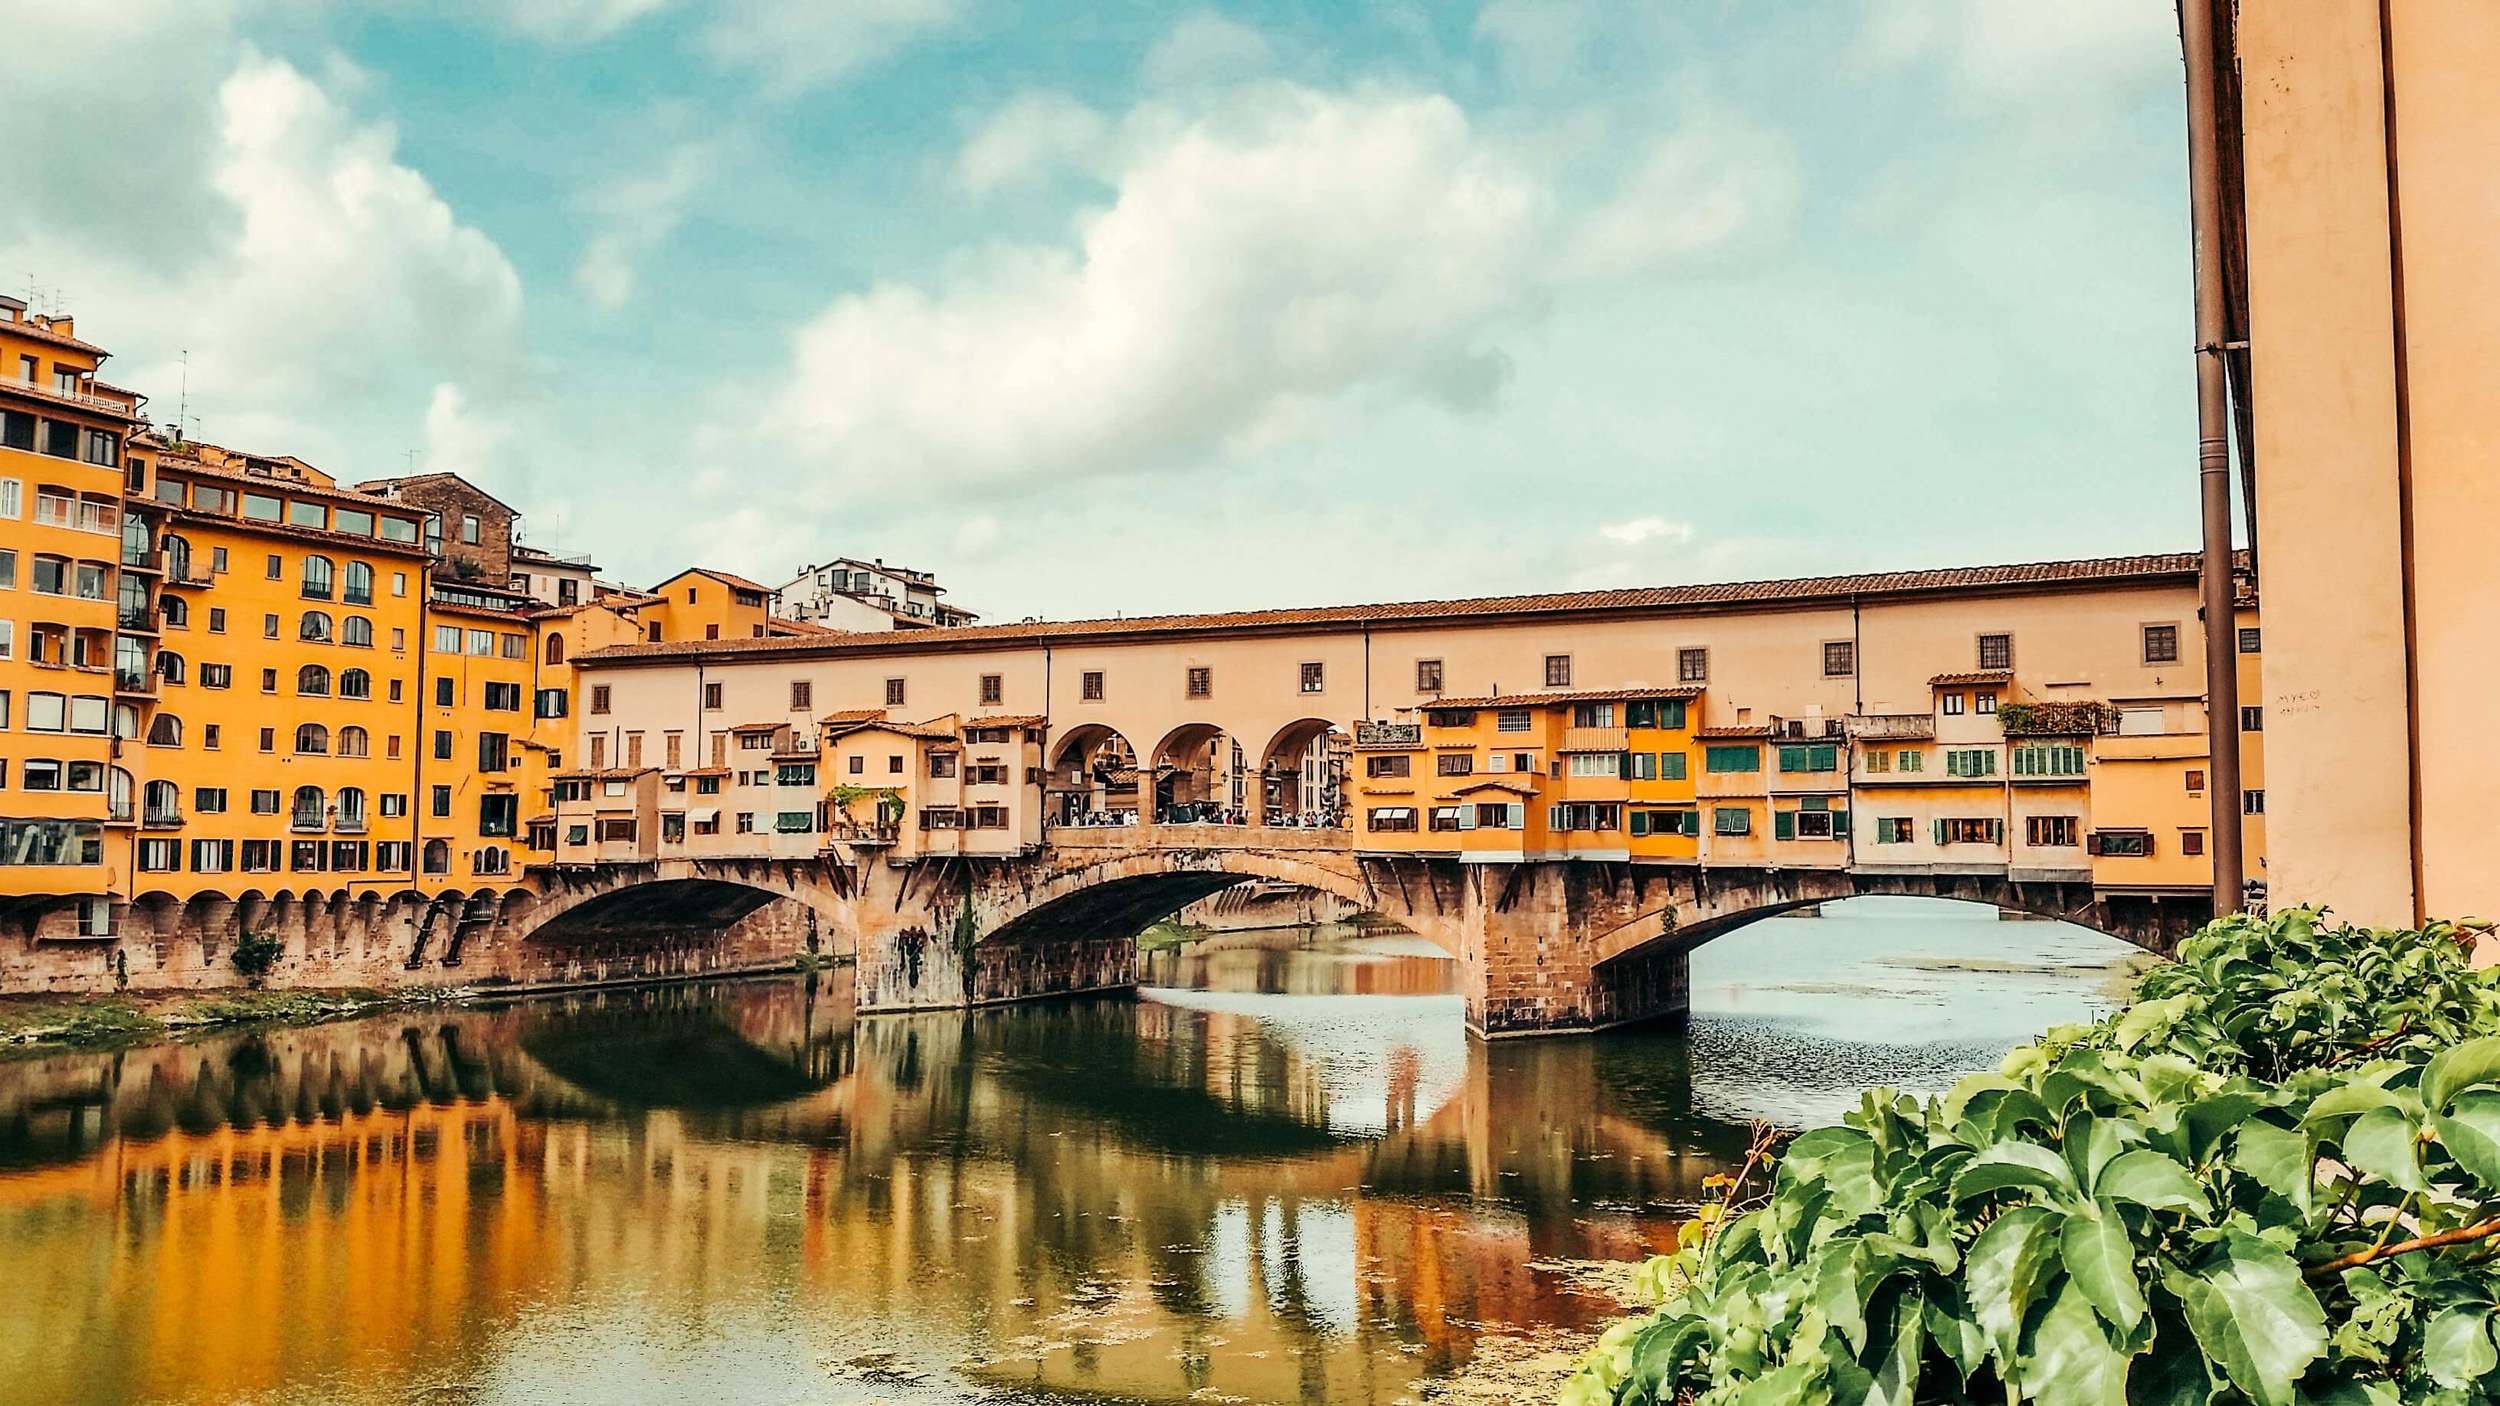 a light pink and orange bridge with multiple layers crossing a river in florence italy